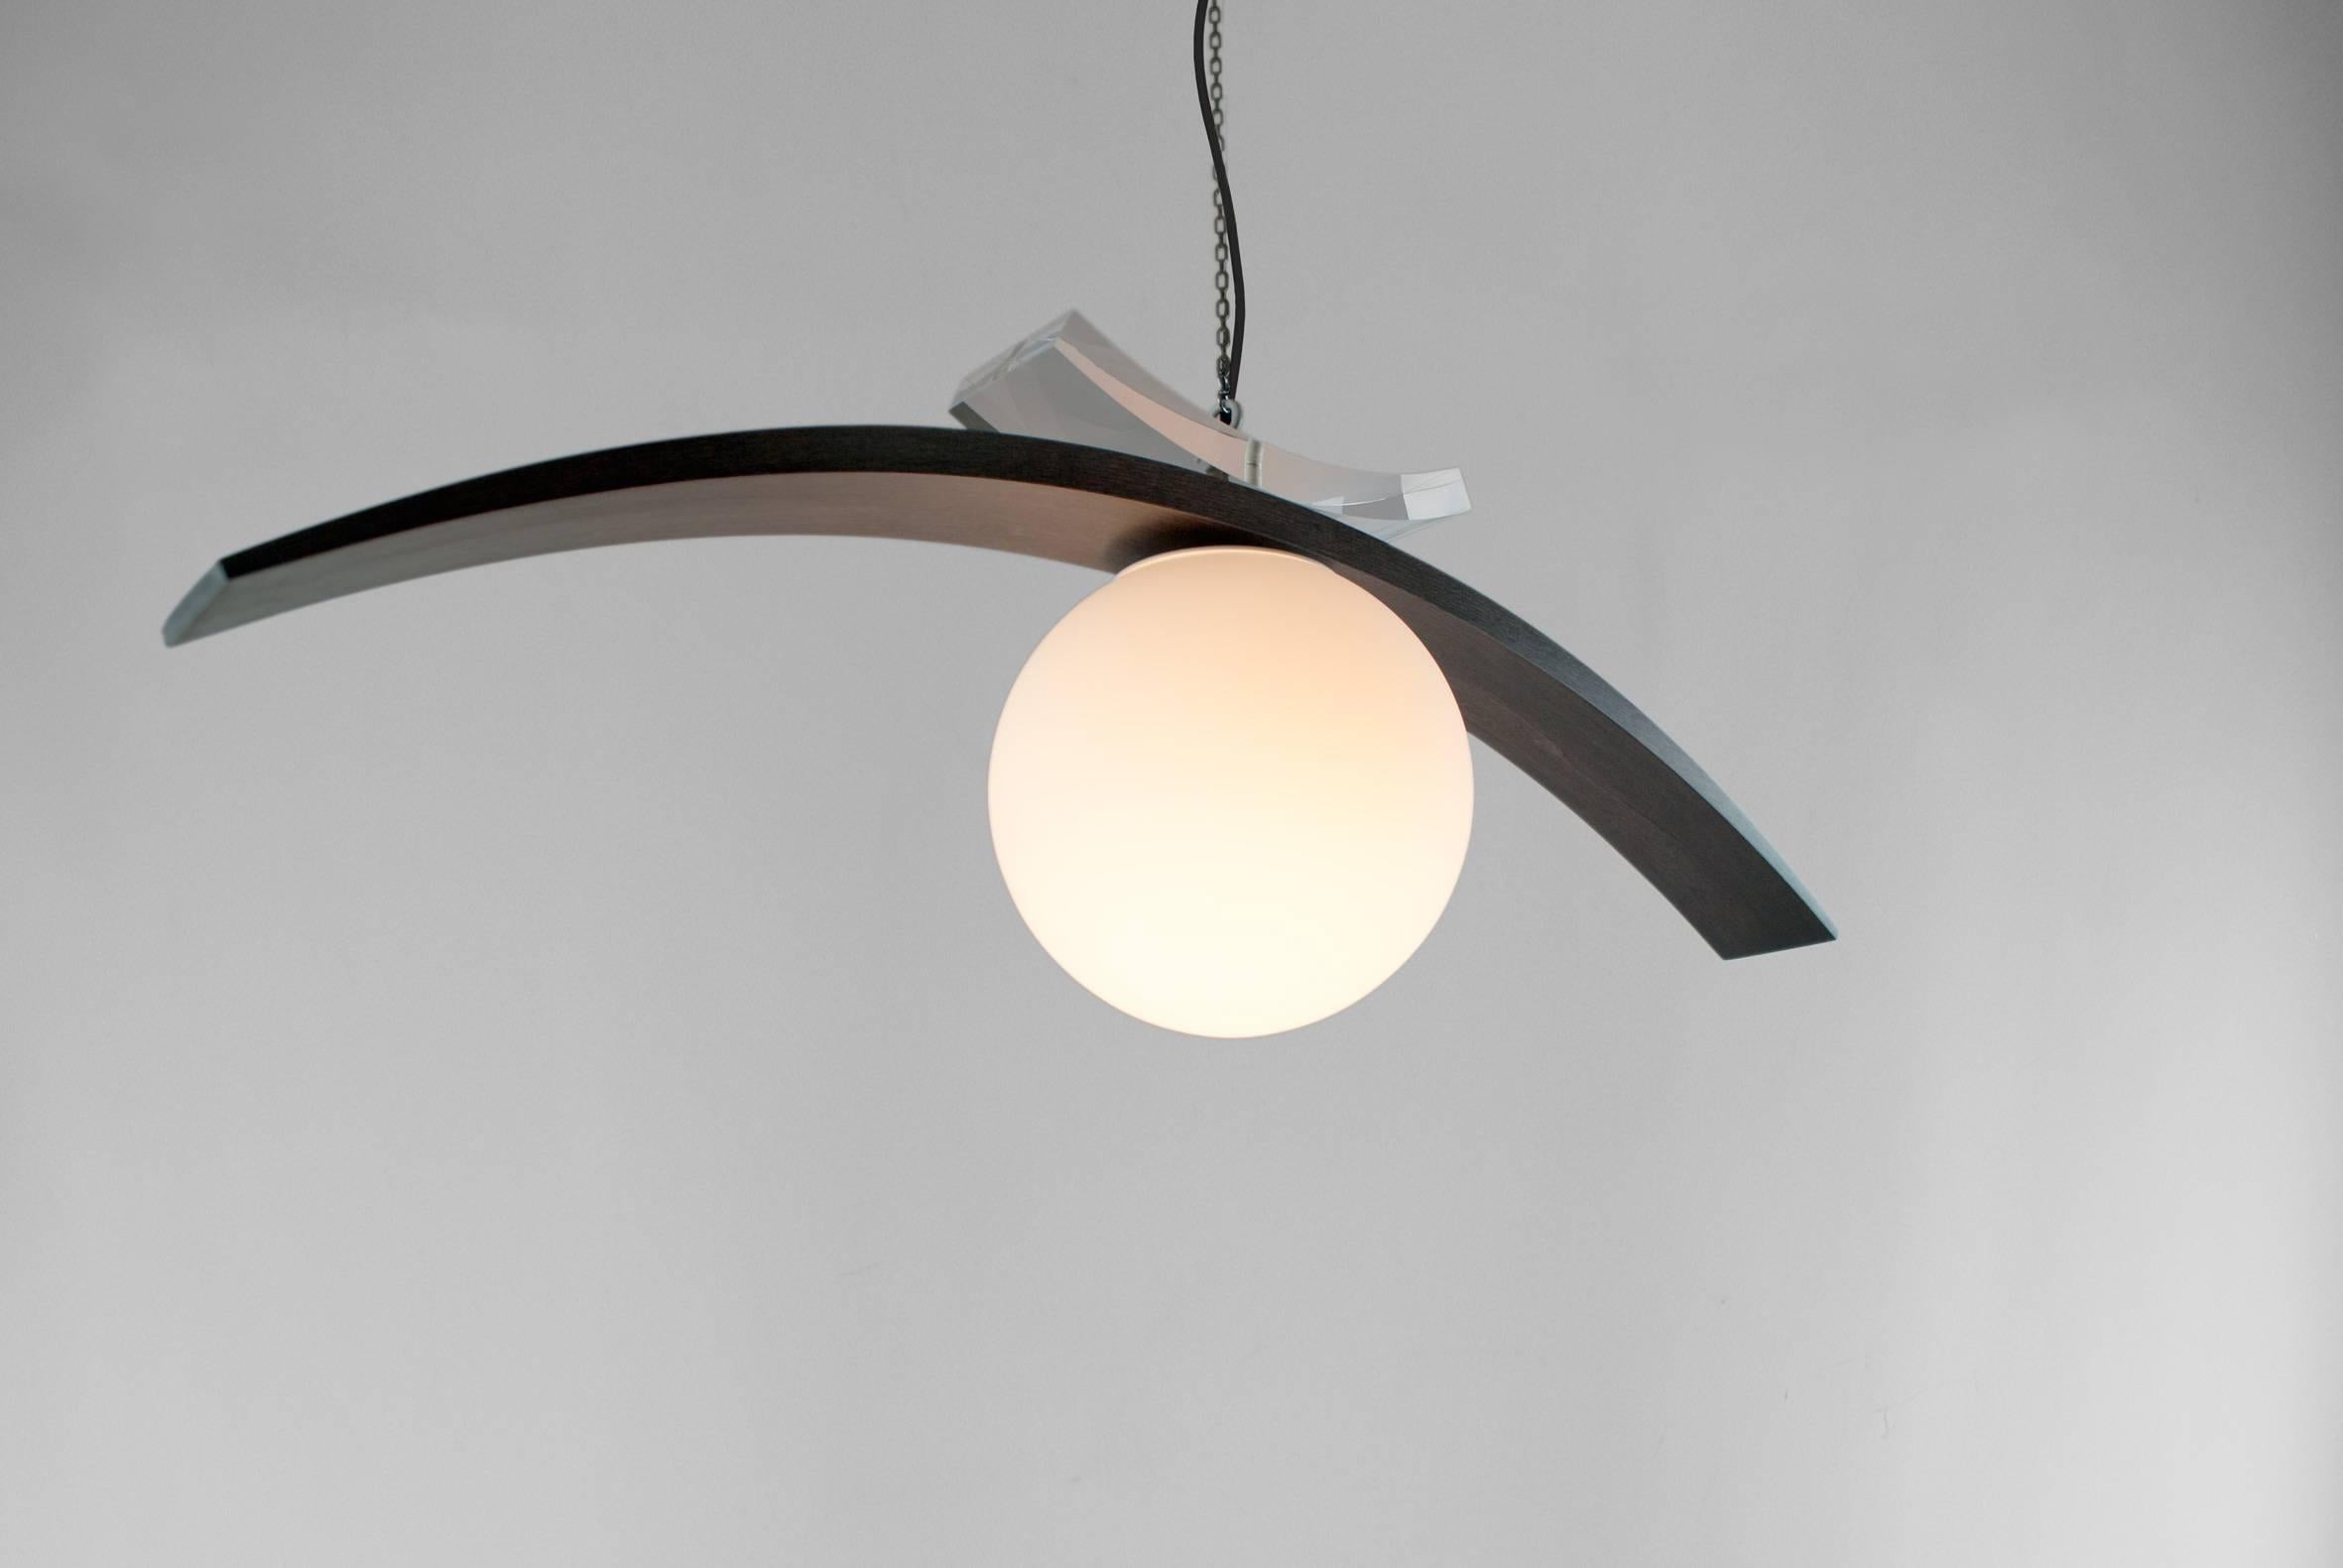 Louis Jobst' Eye Pendant is the abstracted form of an eye, hanging free in space. It is surreal yet contemporary creating an elegant and iconic design. The tapering maple eye lid provides many different shapes and forms due to its profile. The